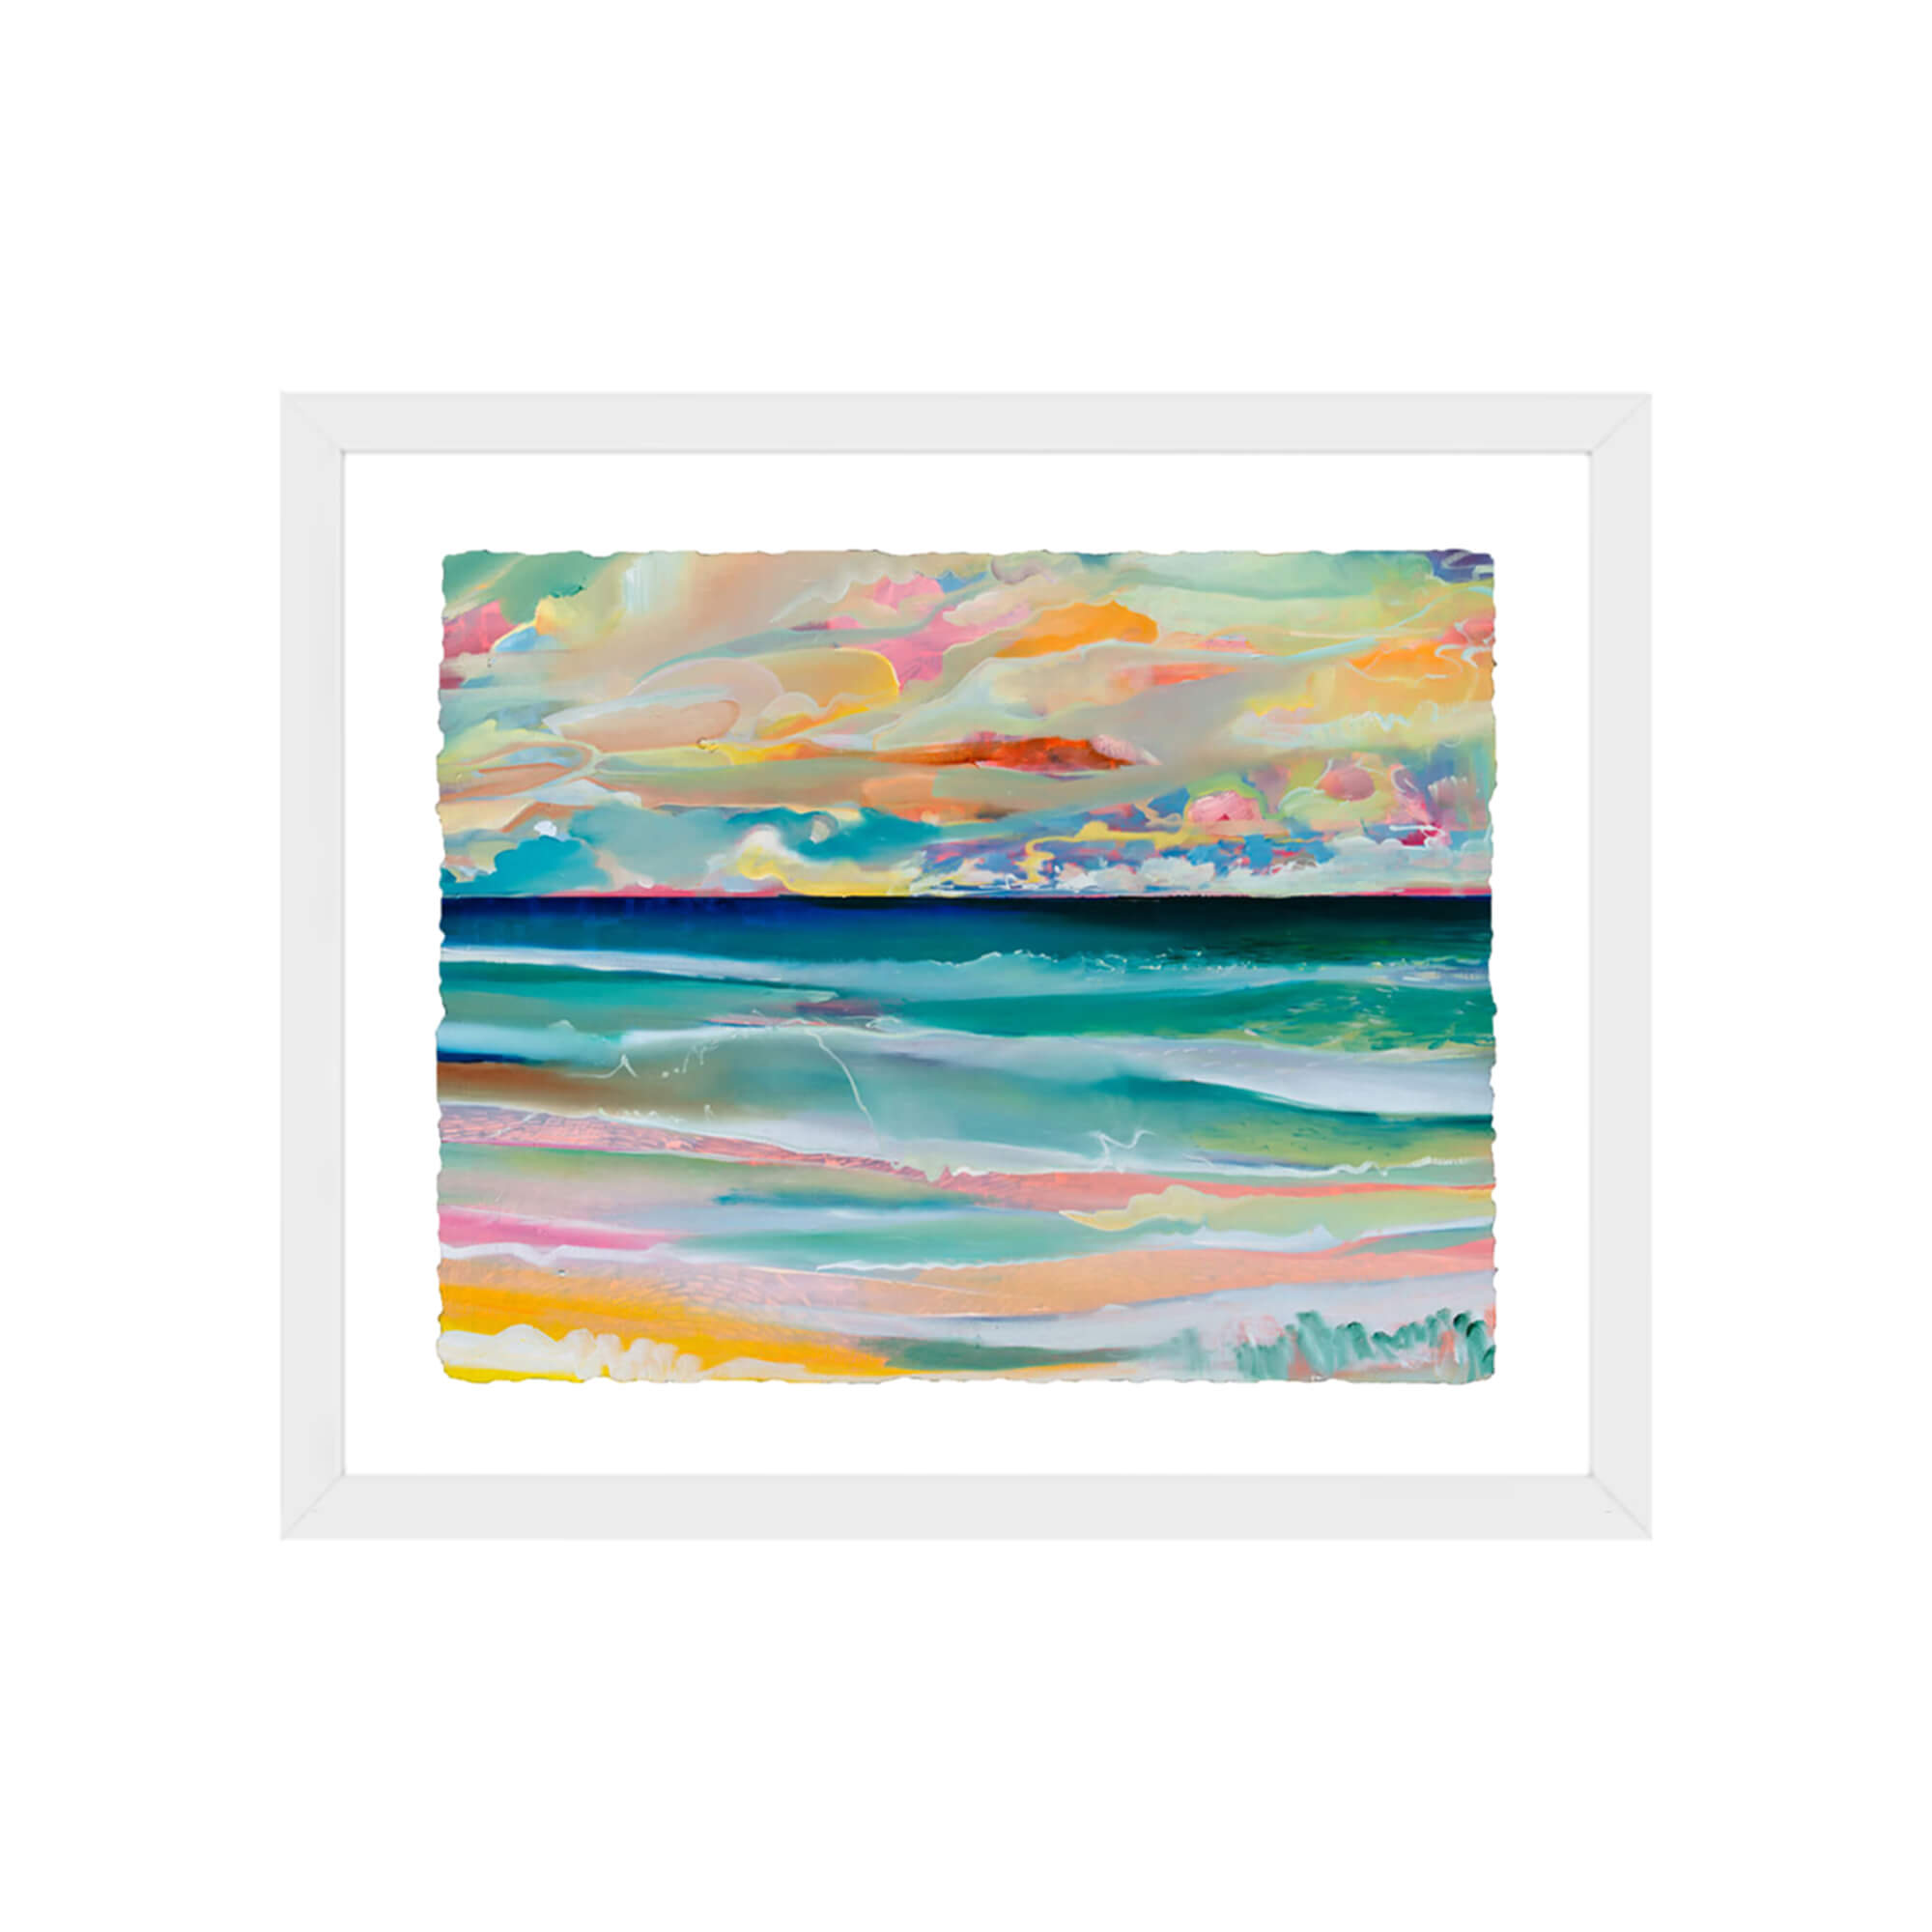 Framed paper art print of an abstract artwork of a seascape with pink, yellow and teal hues by Hawaii artist Saumolia Puapuaga